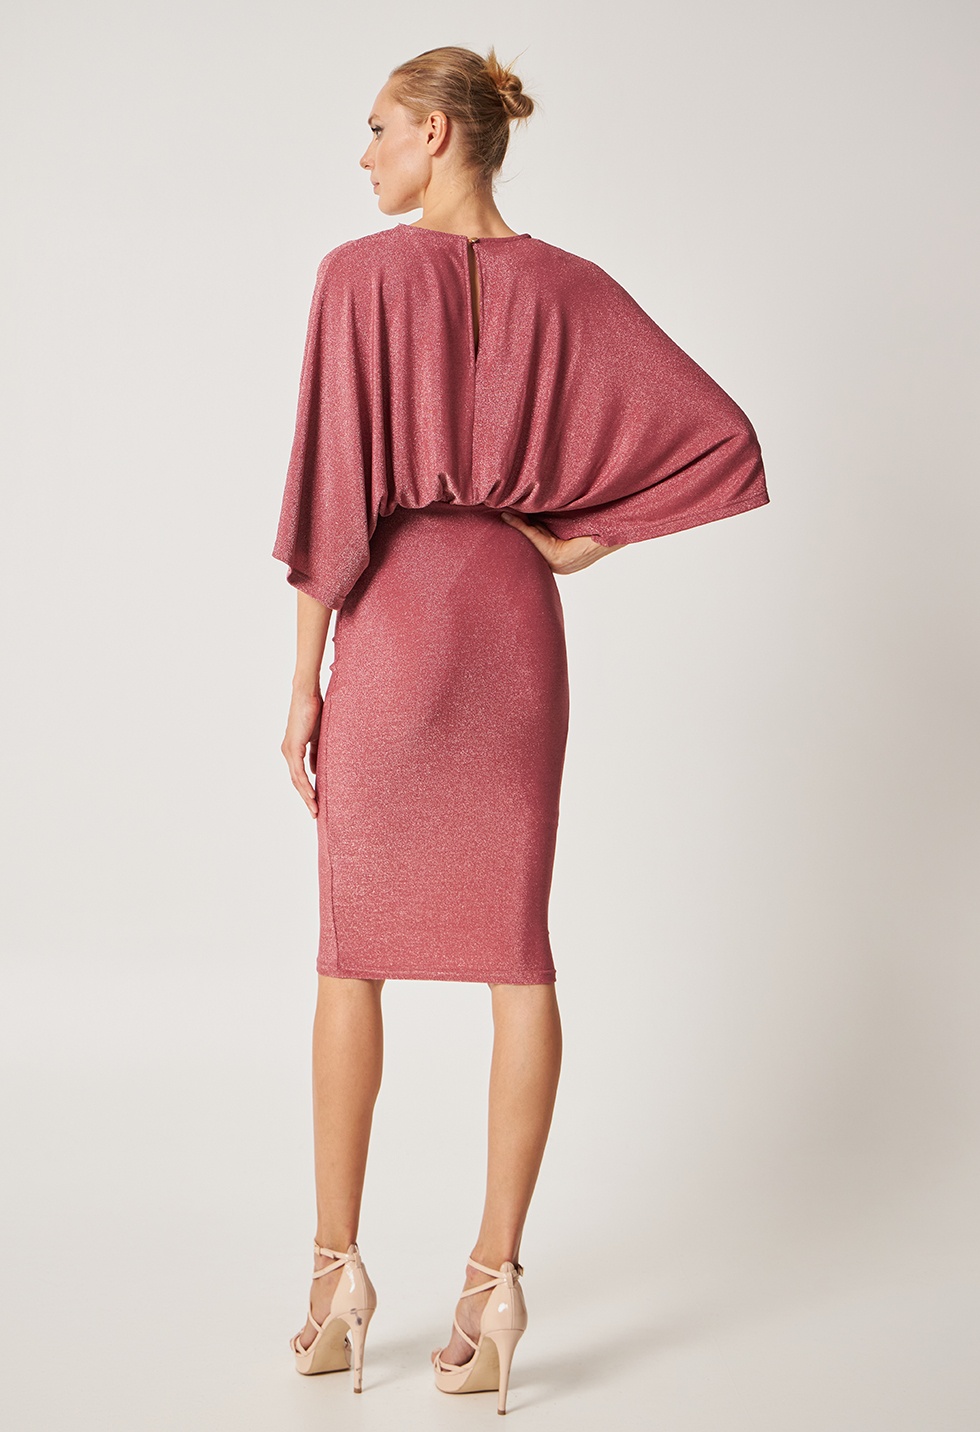 Lurex dress with batwing sleeves